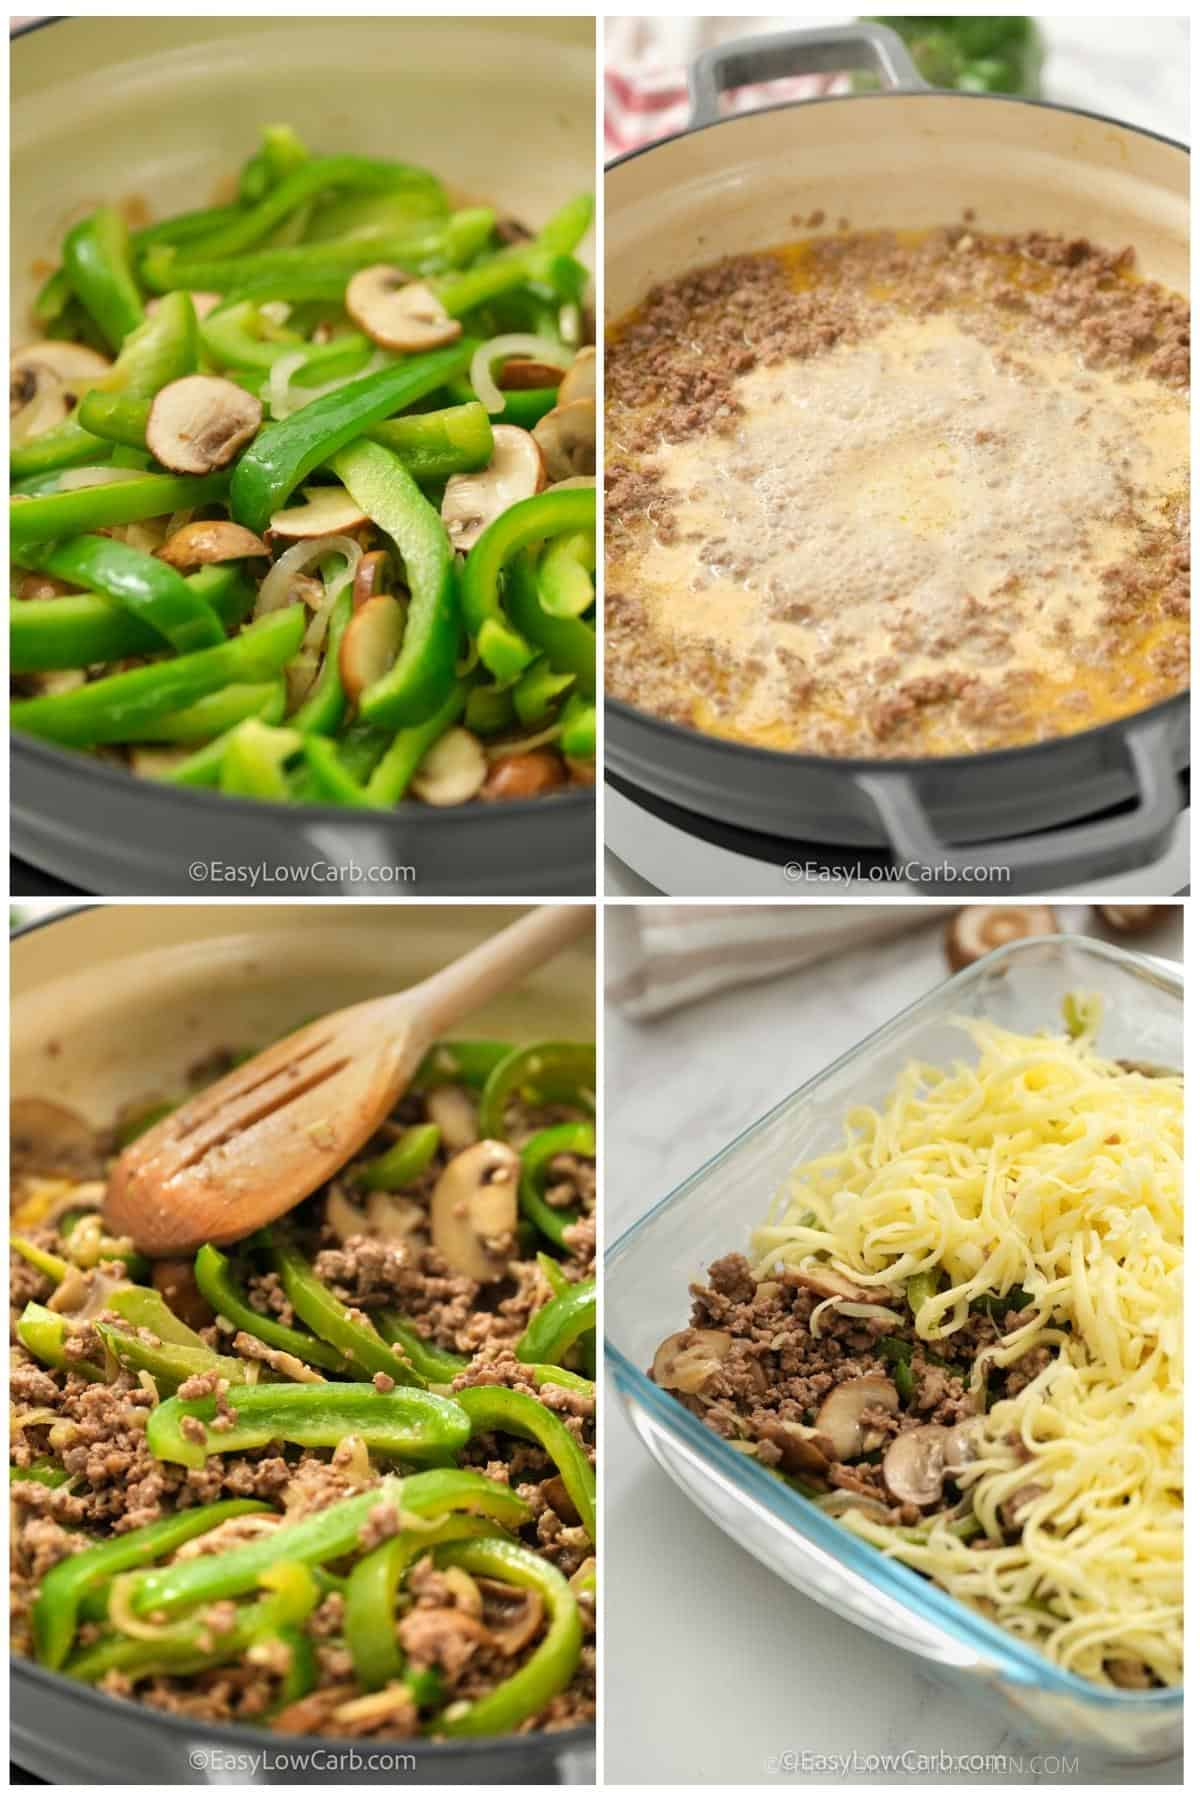 process of adding ingredients together to make Low Carb Philly Cheesesteak Casserole Recipe